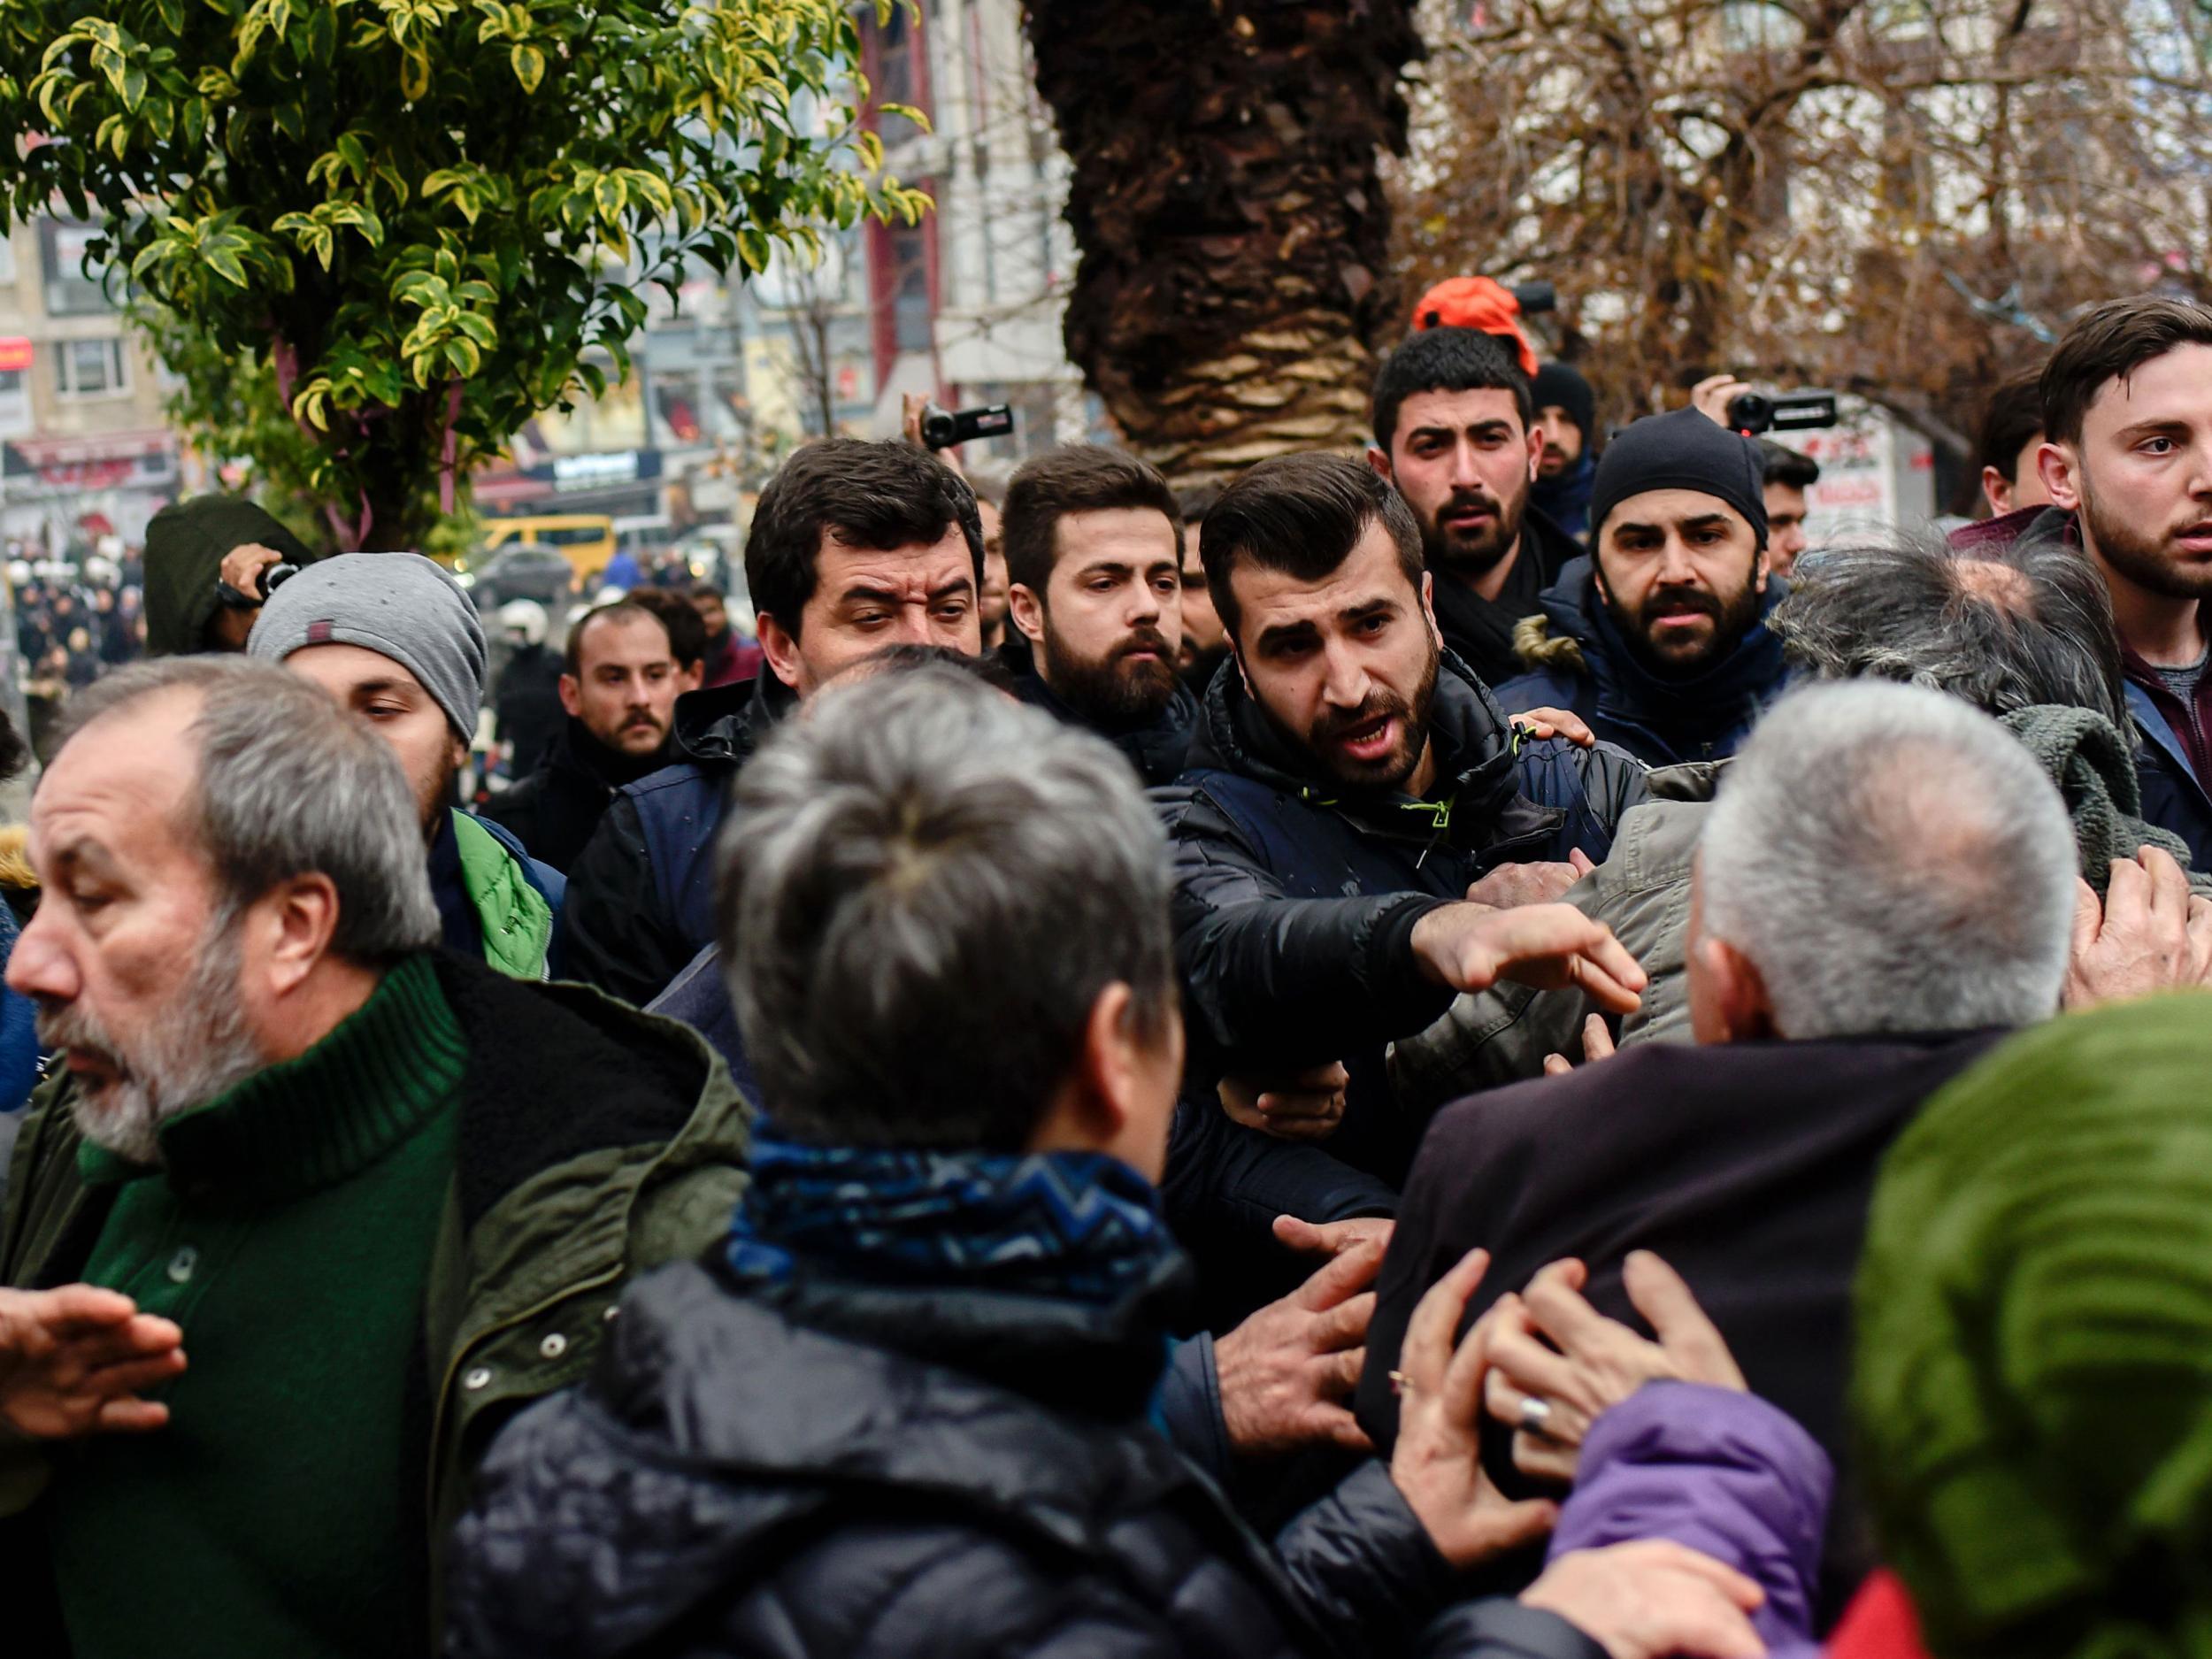 Members of the HDP (Peoples’ Democratic Party), the democratic Kurdish political party, protesting against Operation Olive Branch in Istanbul on 21 January